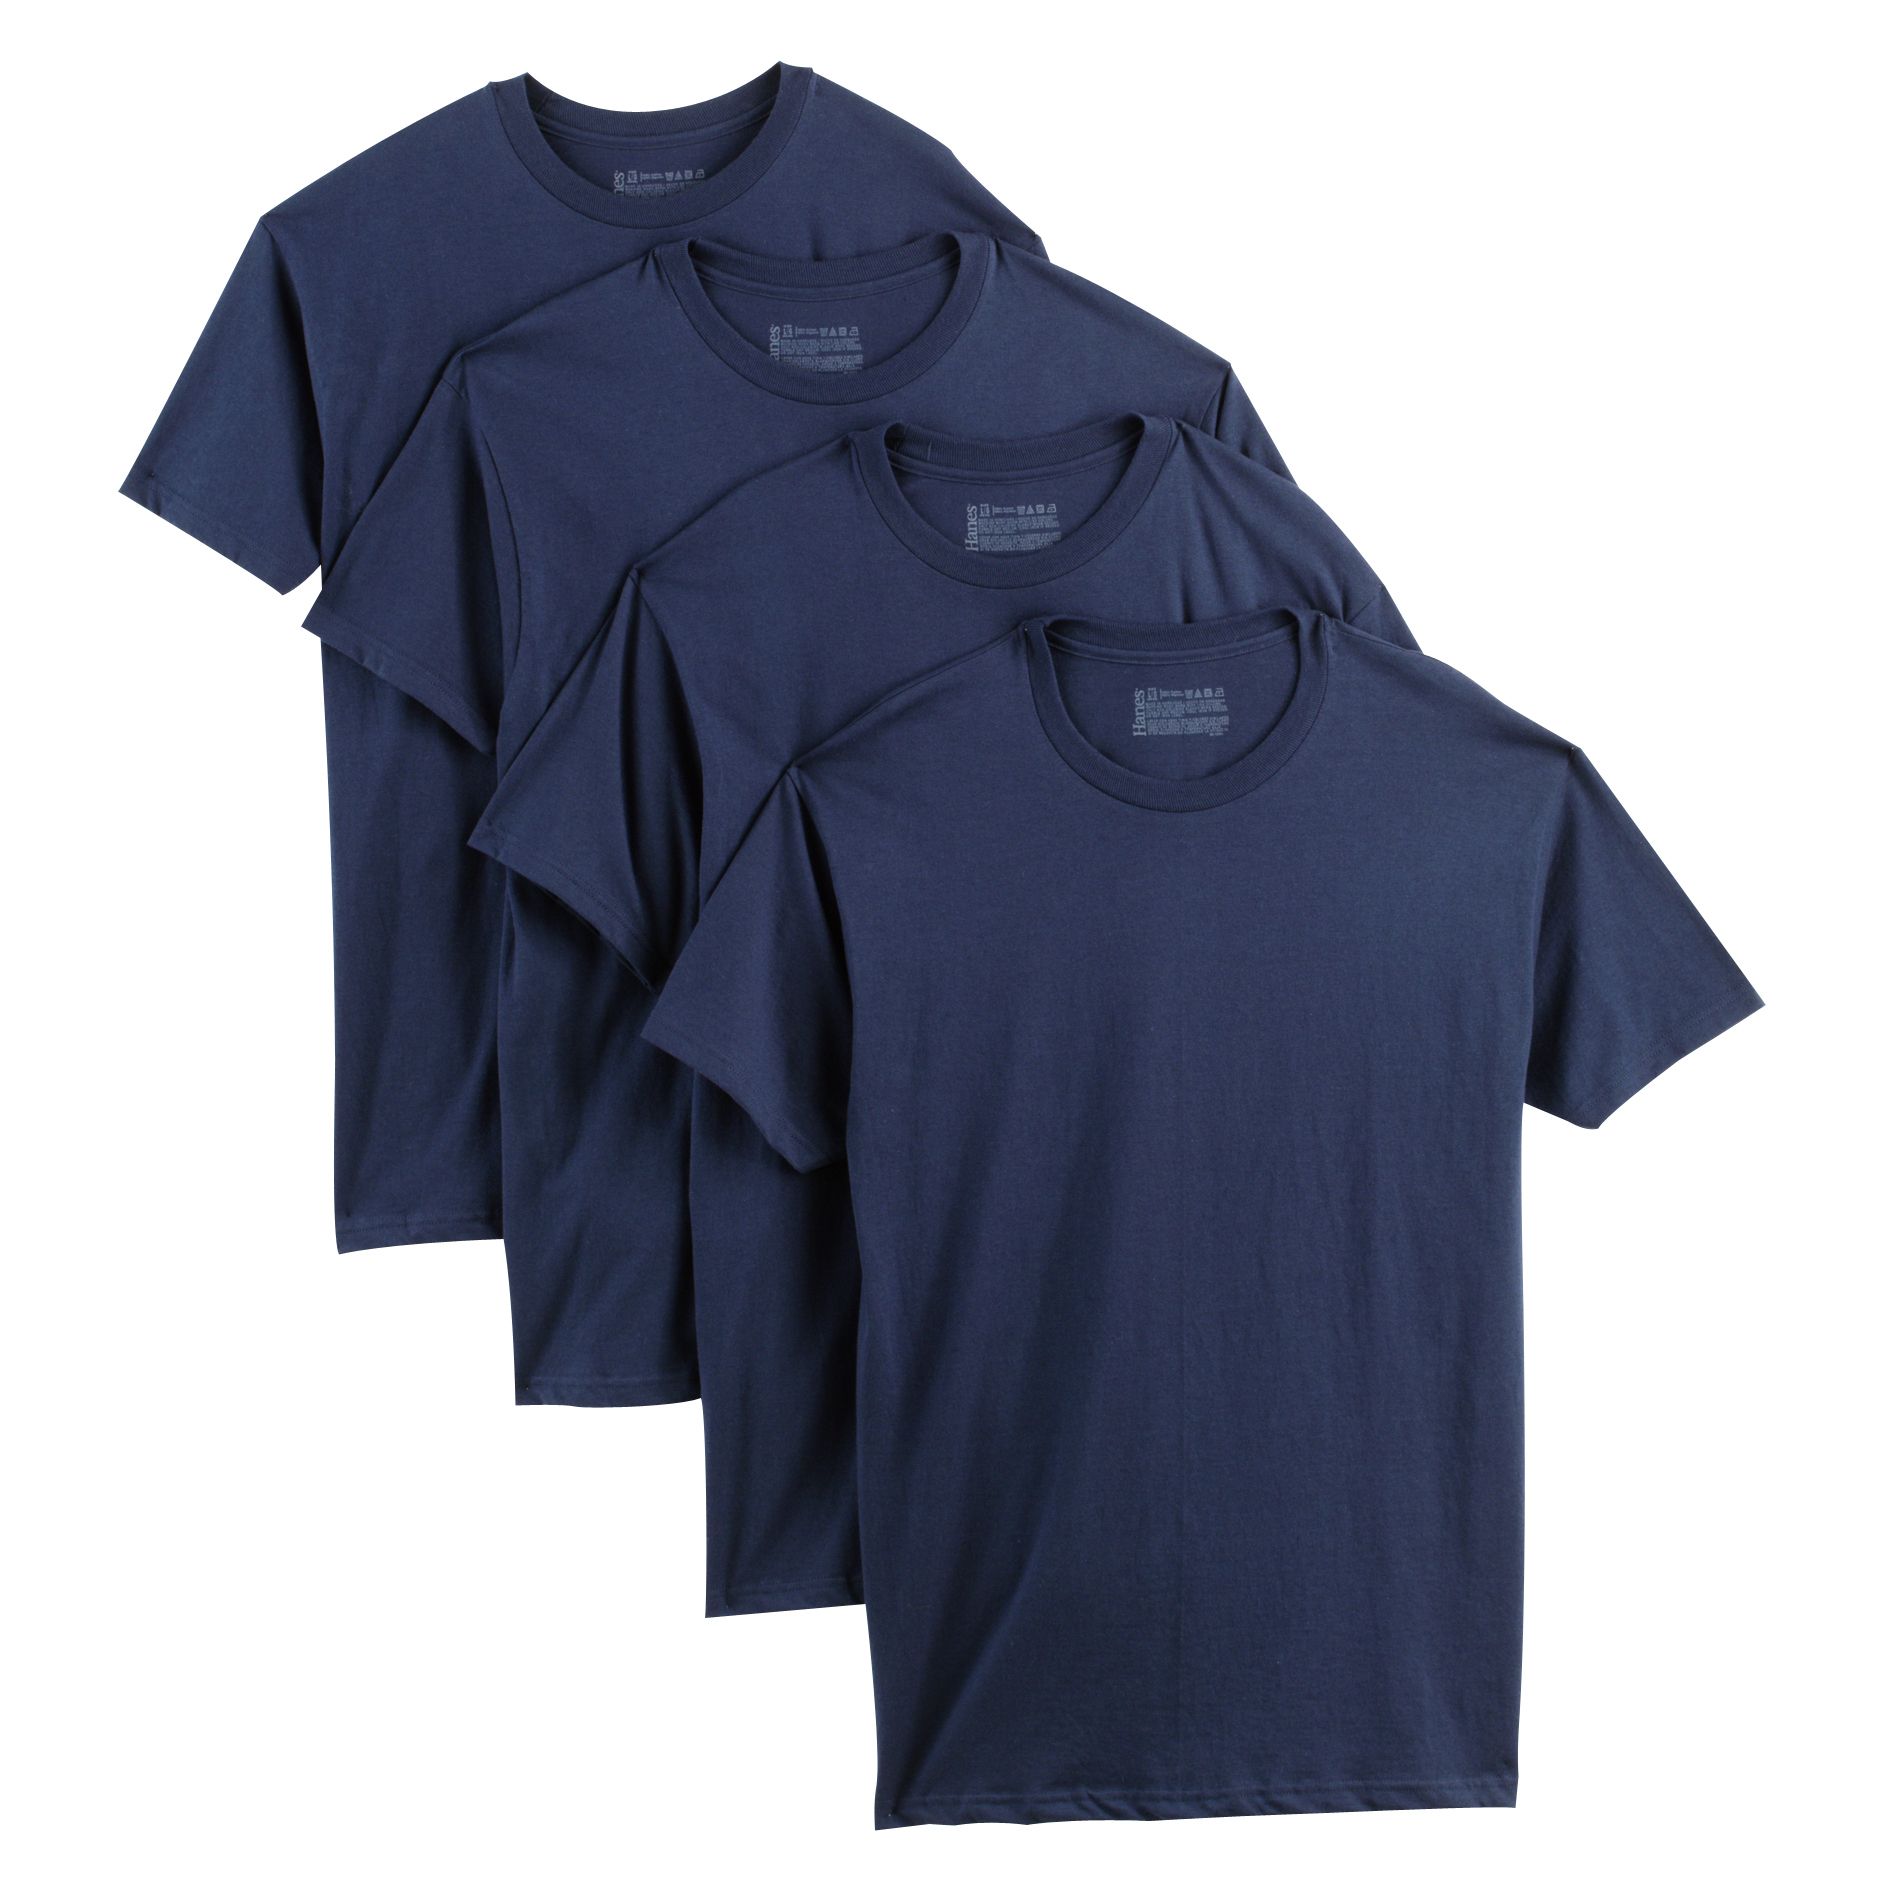 Hanes Men's 4-Pack Dyed Crew T-Shirts